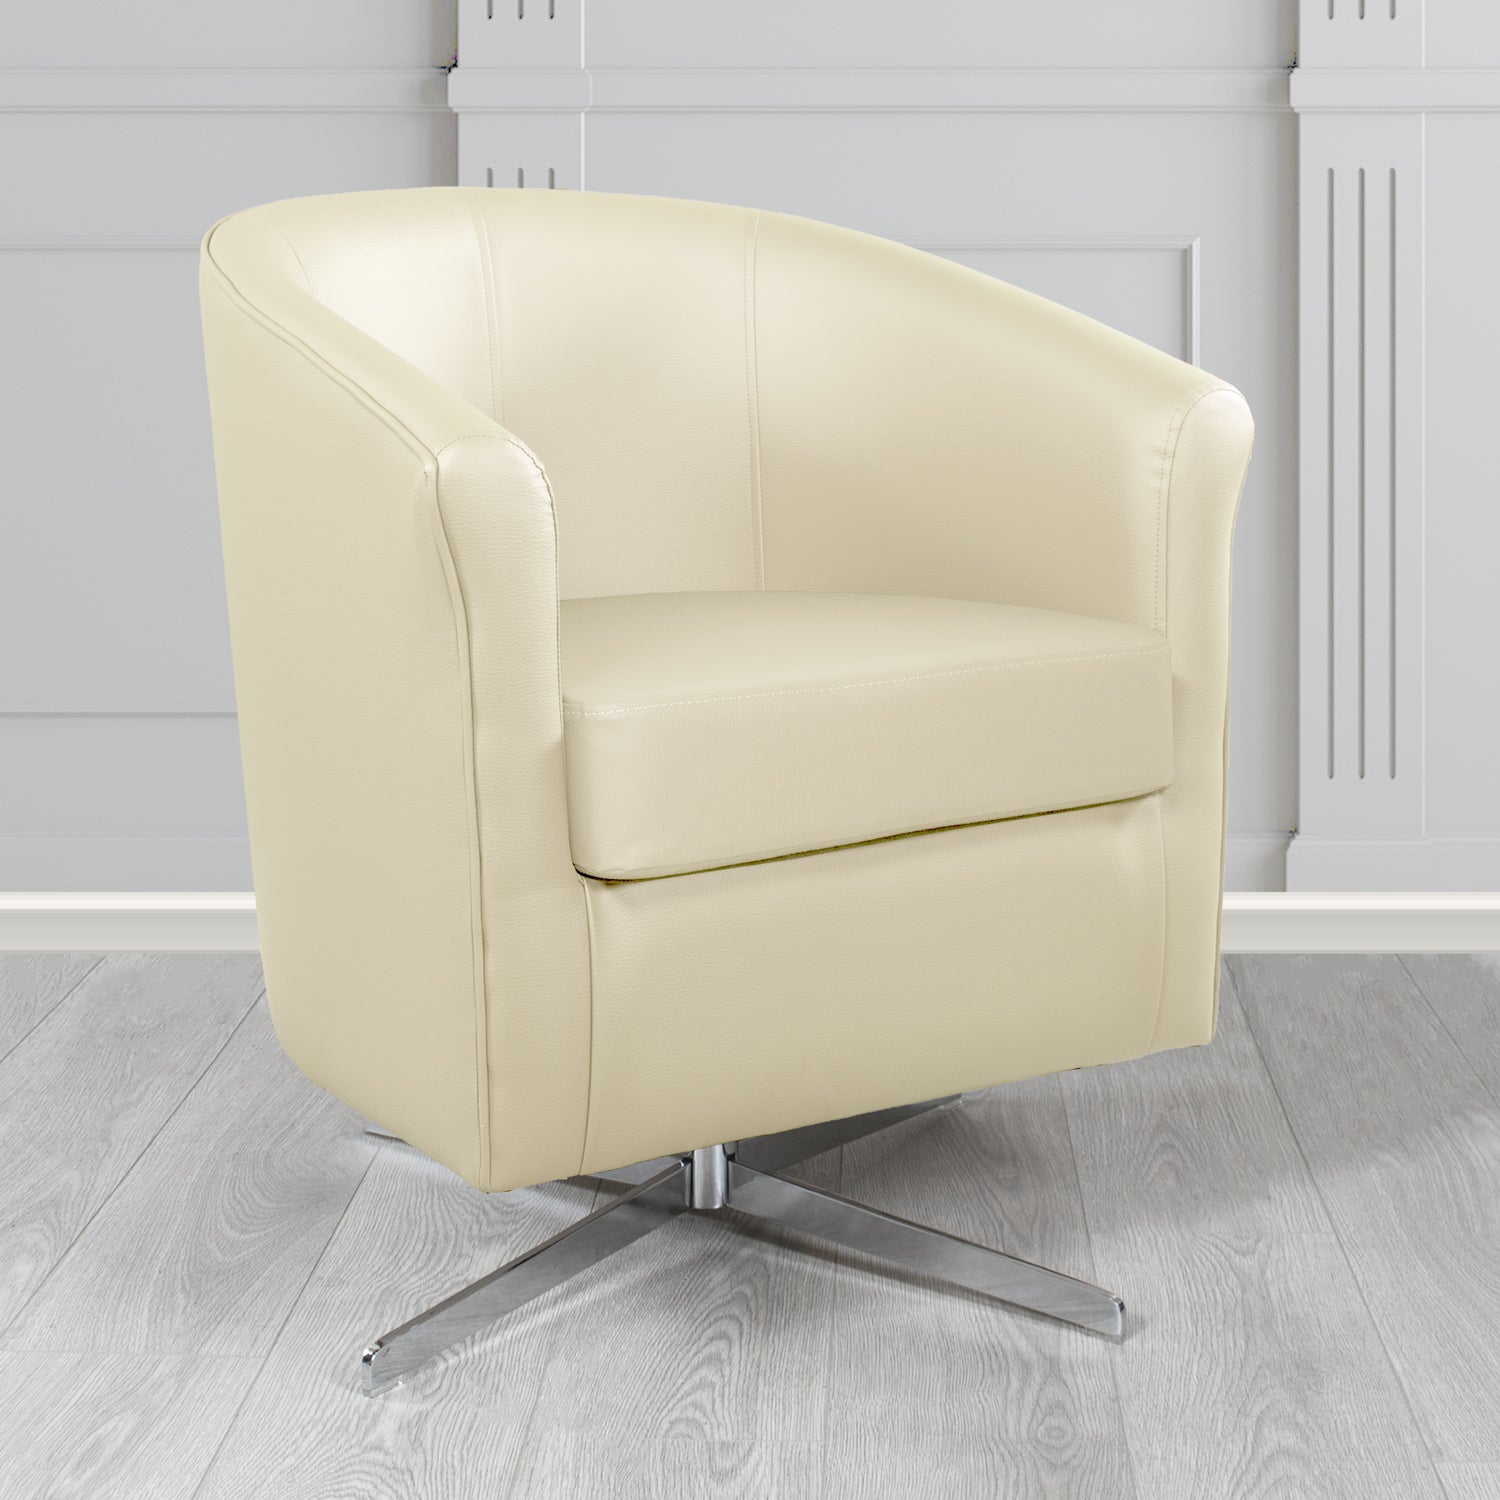 Cannes Swivel Tub Chair in Madrid Cream Faux Leather - The Tub Chair Shop